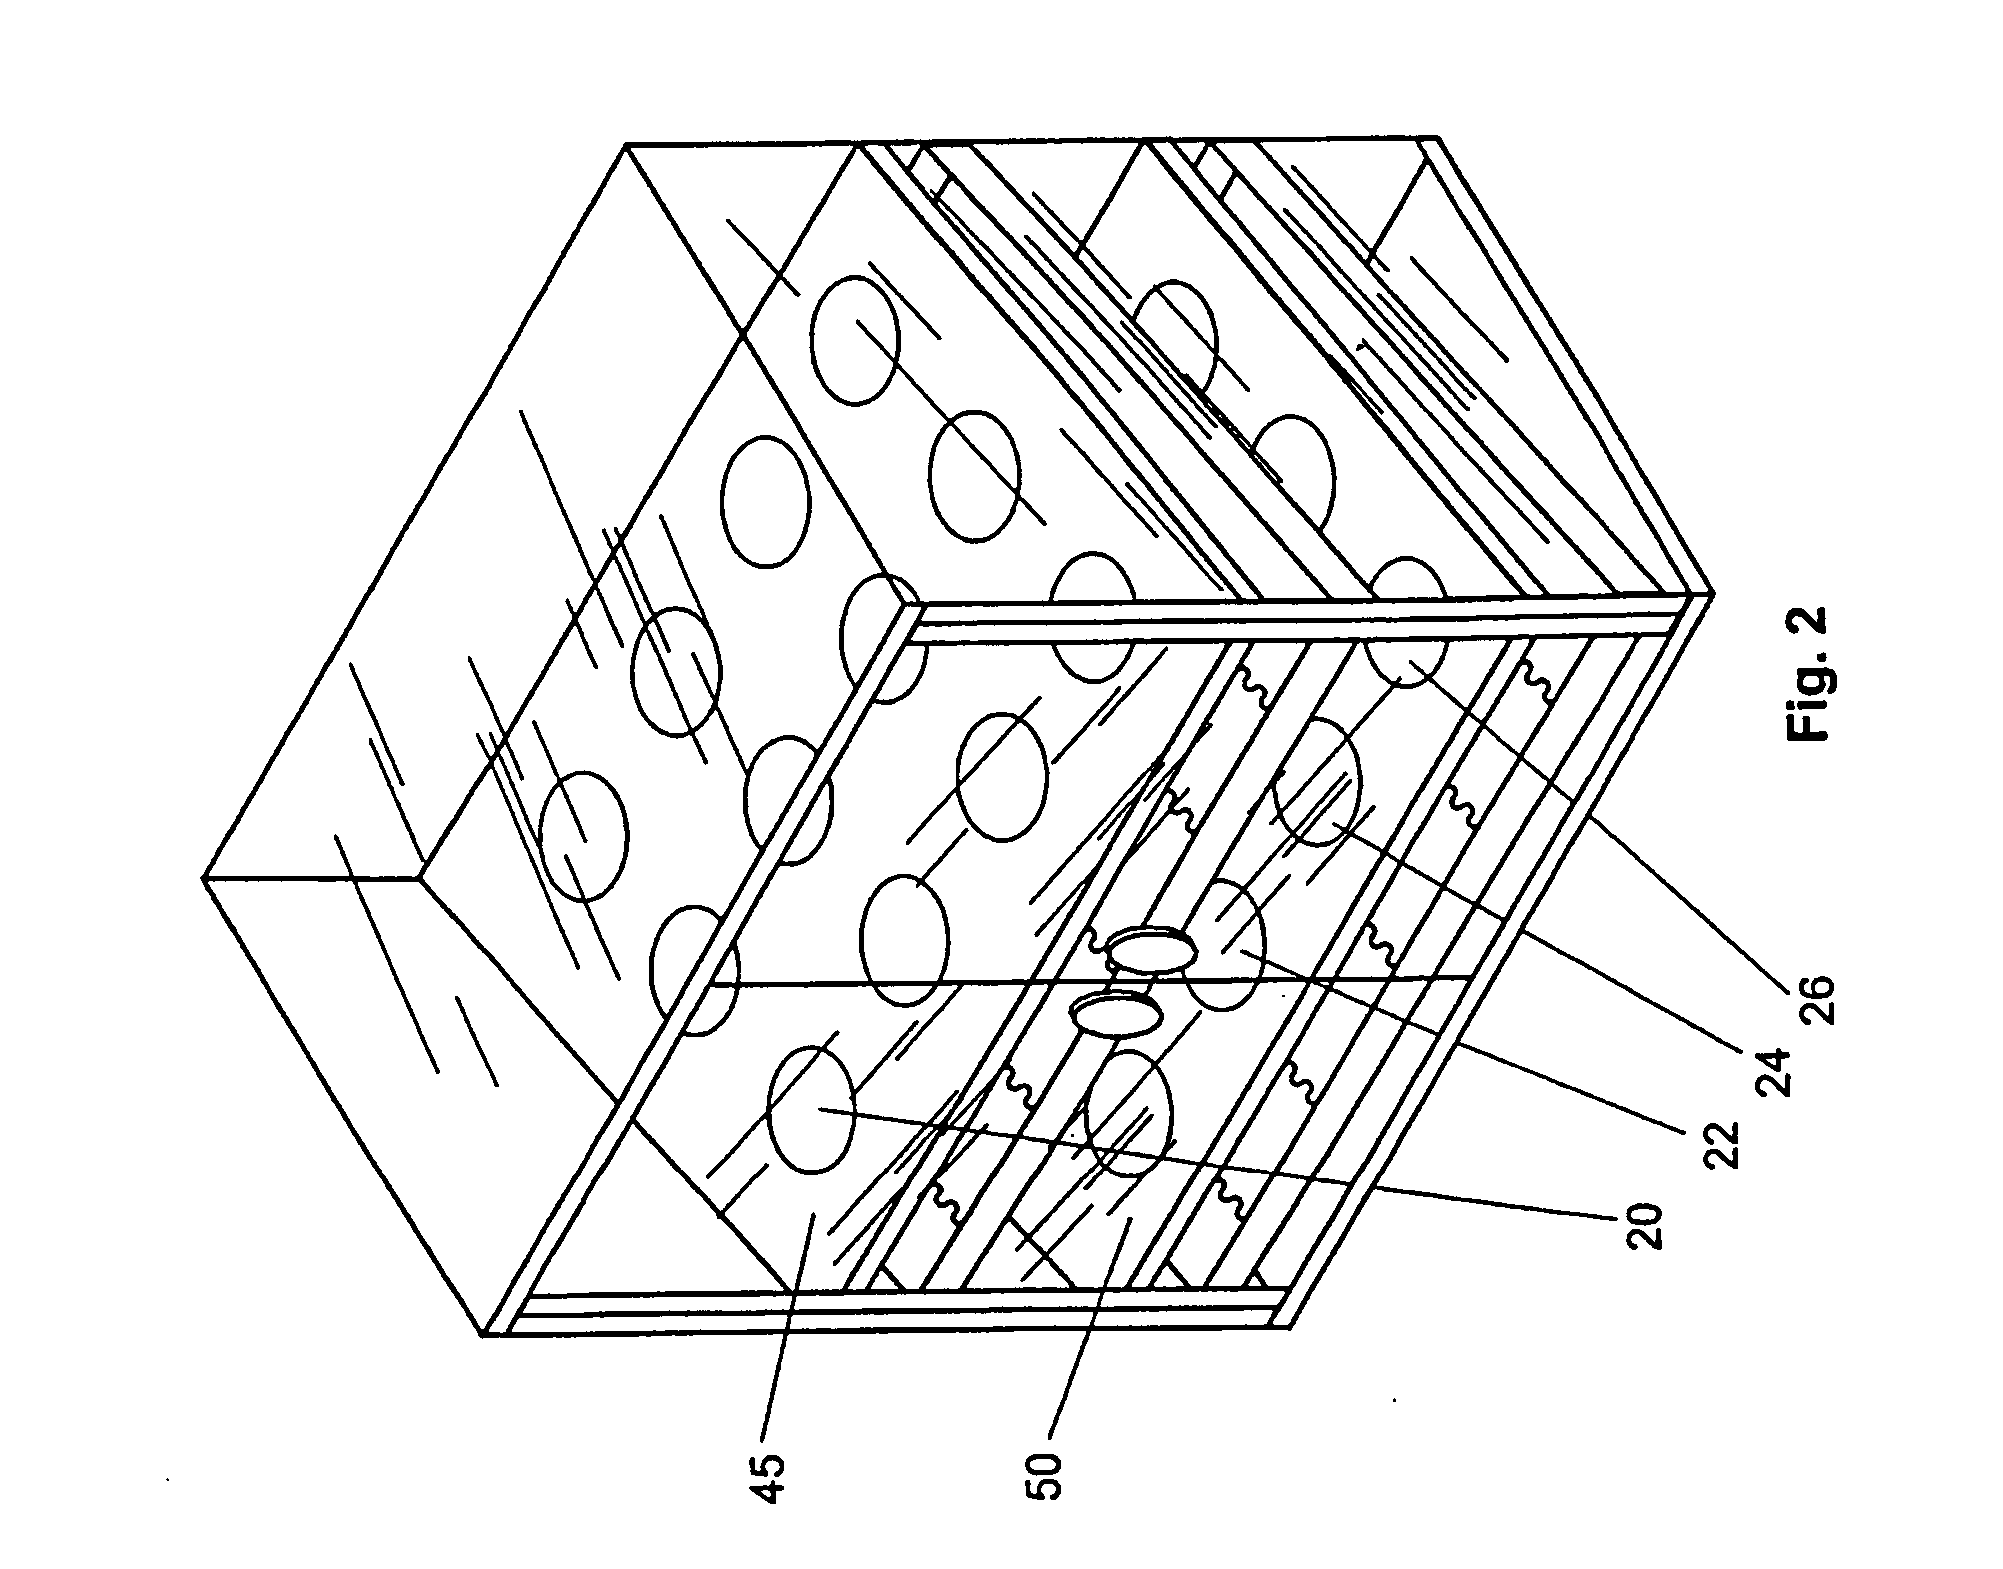 Apparatus for controlling the drying of previously baked goods